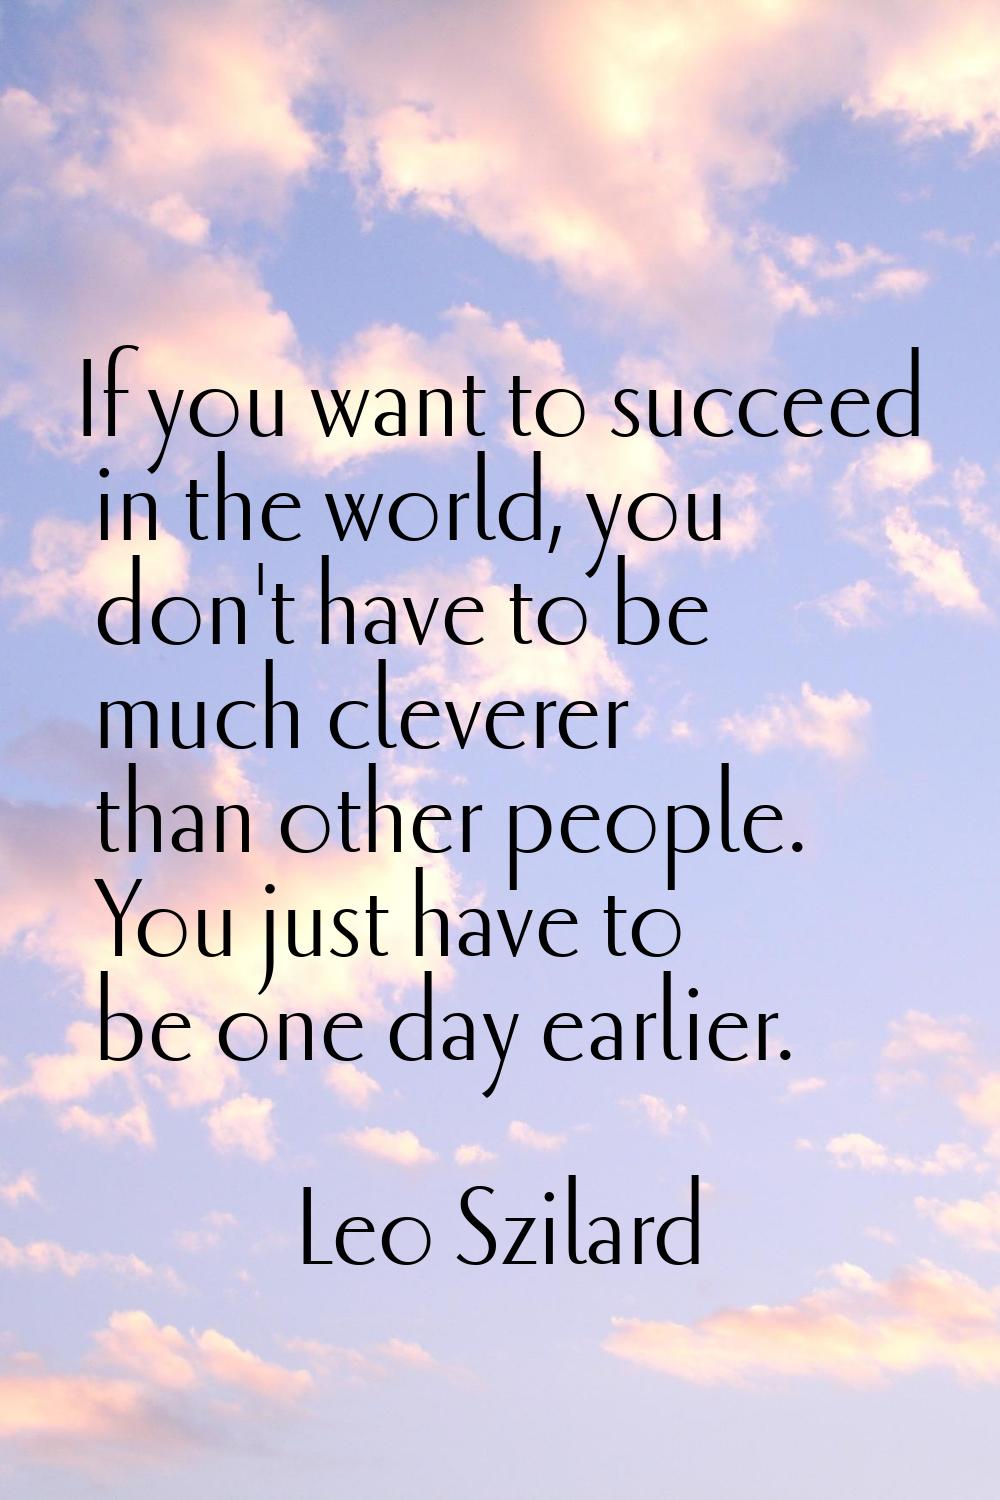 If you want to succeed in the world, you don't have to be much cleverer than other people. You just